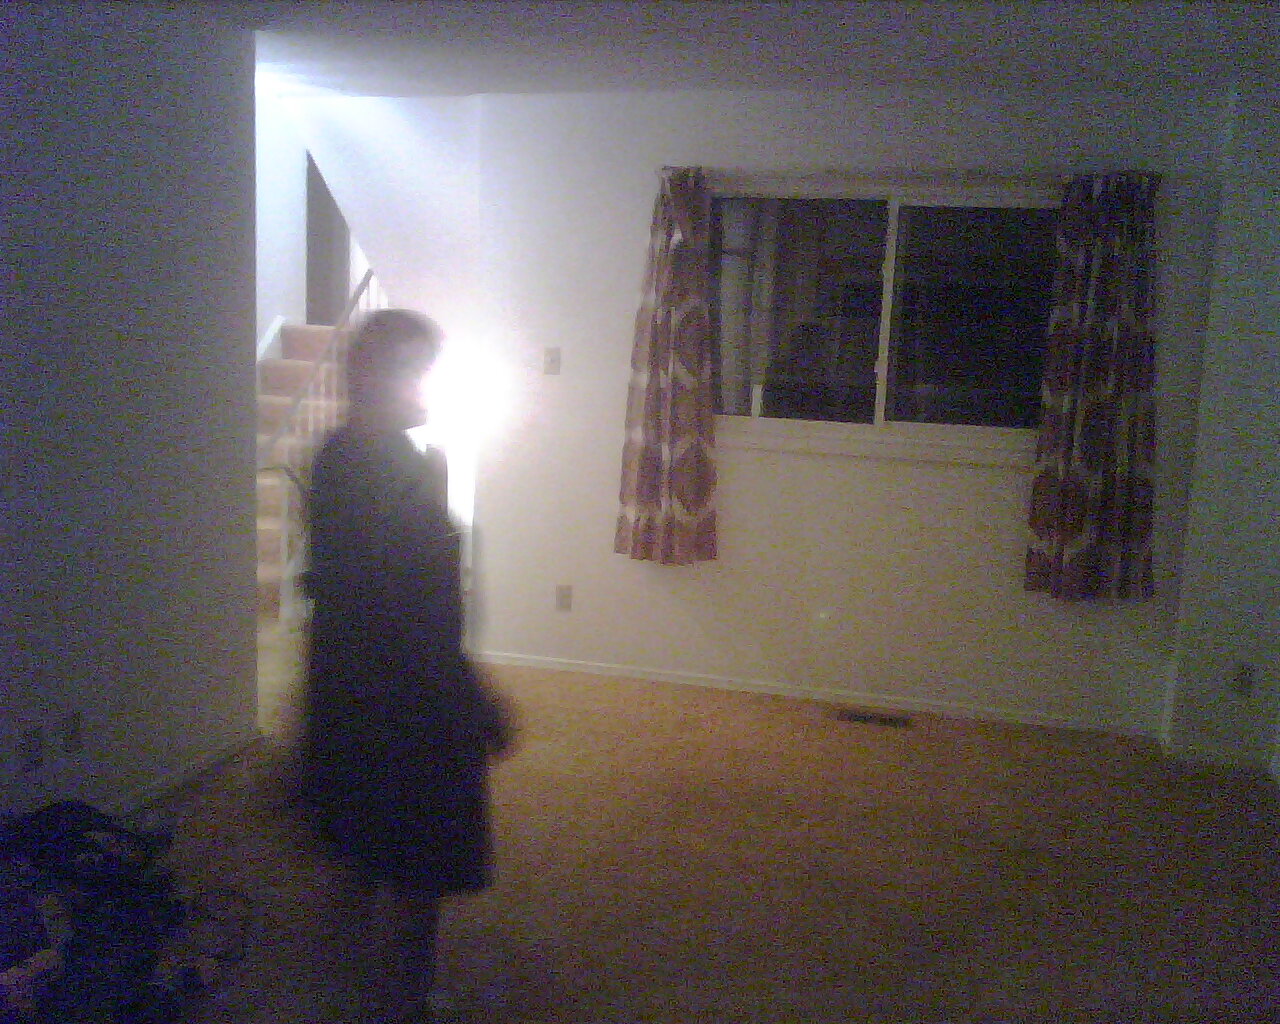 The living room's front end as seen from the living room's rear